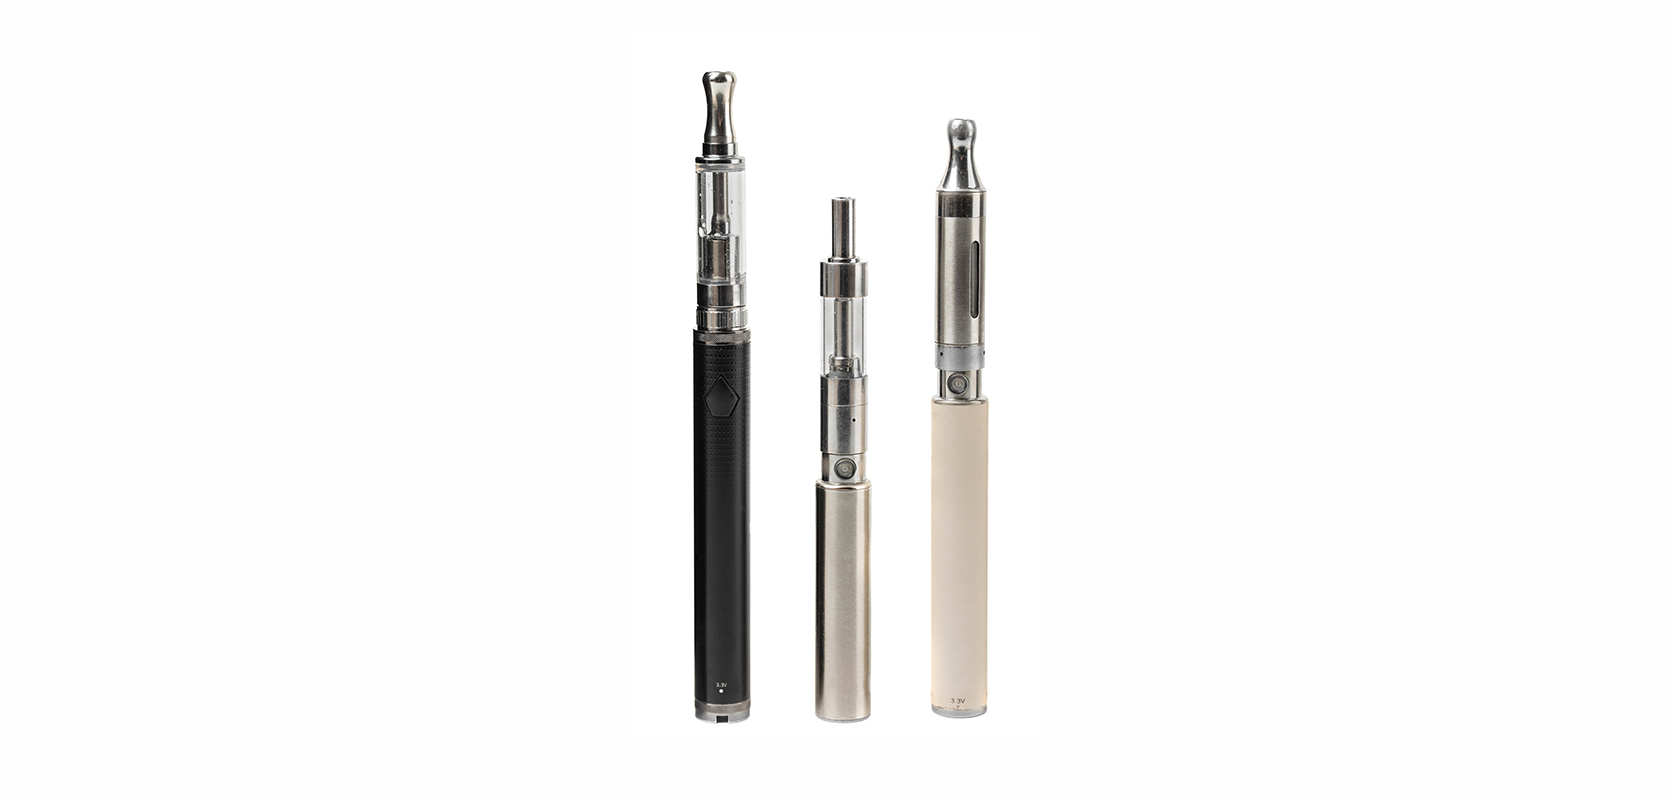 Vape pens and vape cartridges for sale online from dispensary for weed online Canada West Coast Cannabis. Canadian online dispensary for cheapweed.